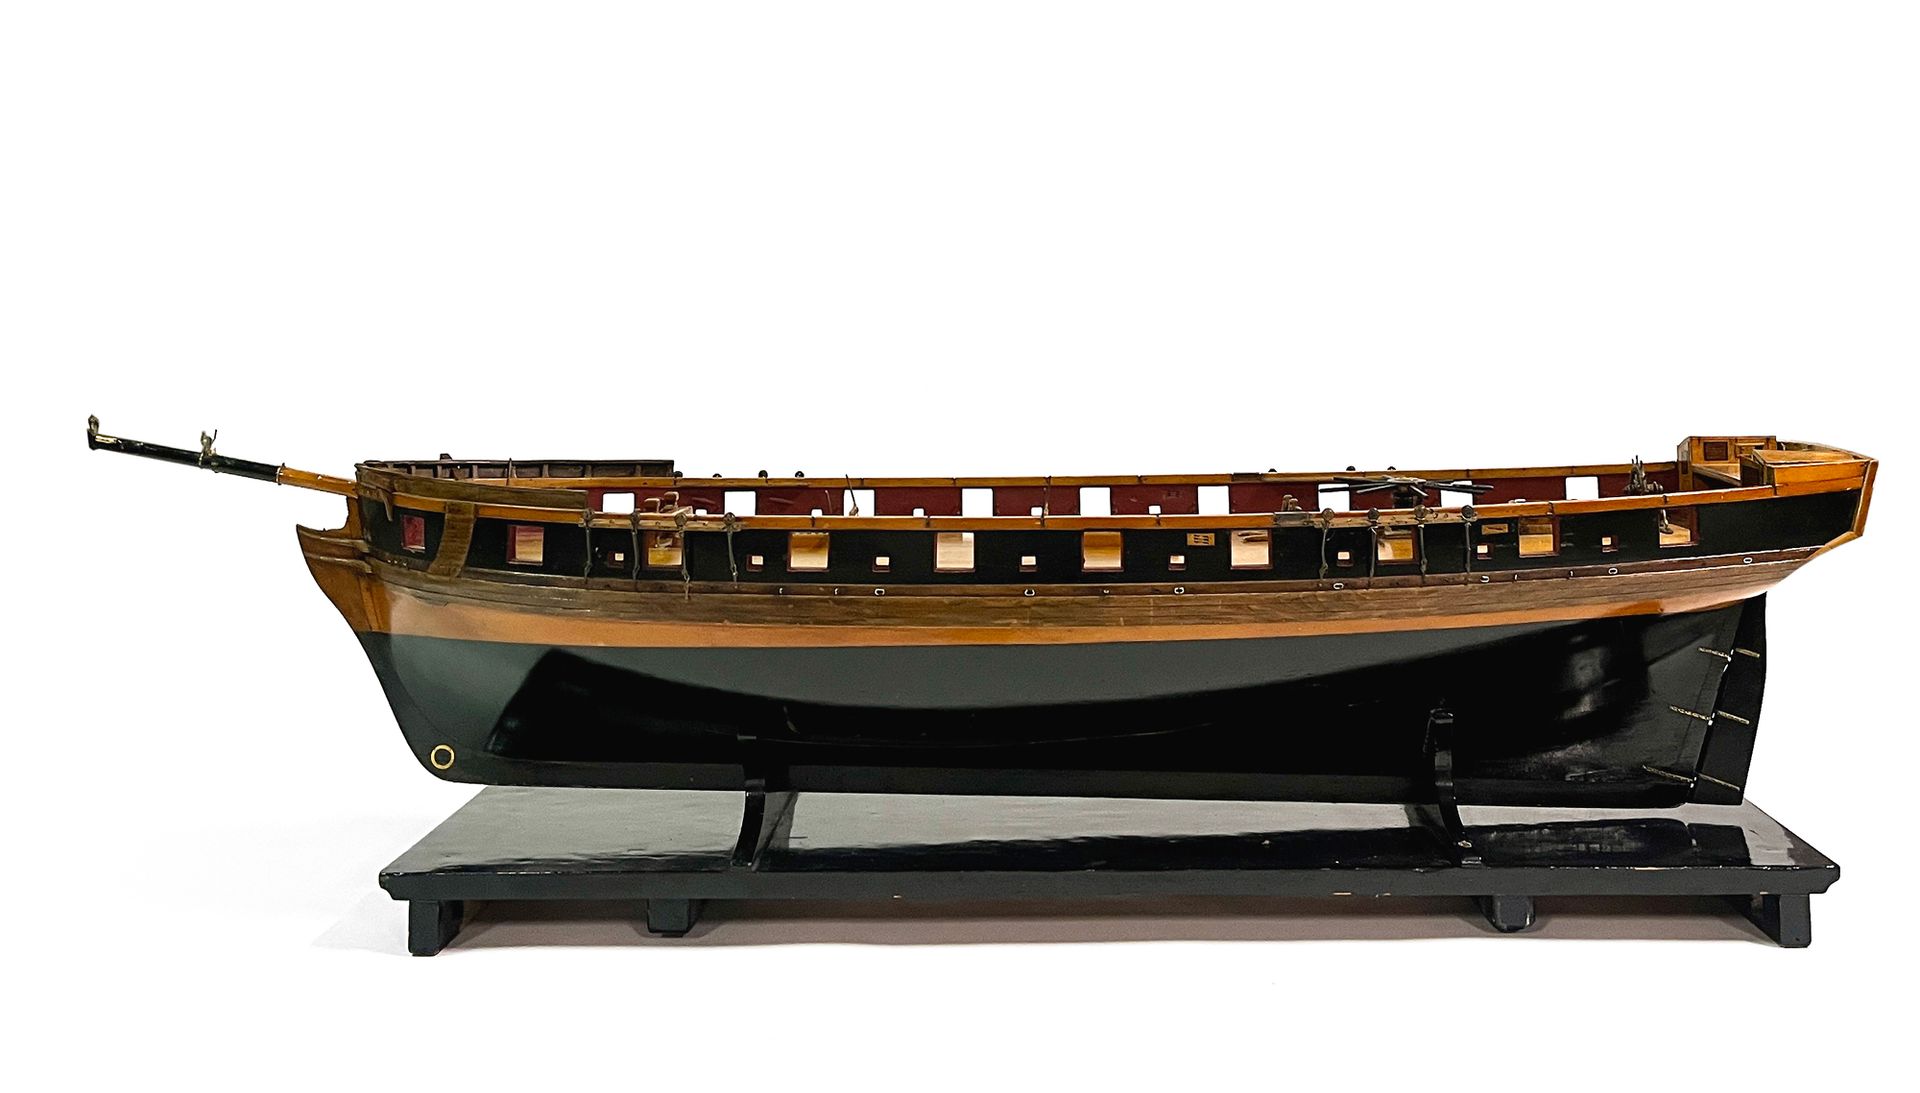 Null Scale naval architecture model of a war brig from the First Empire period, &hellip;